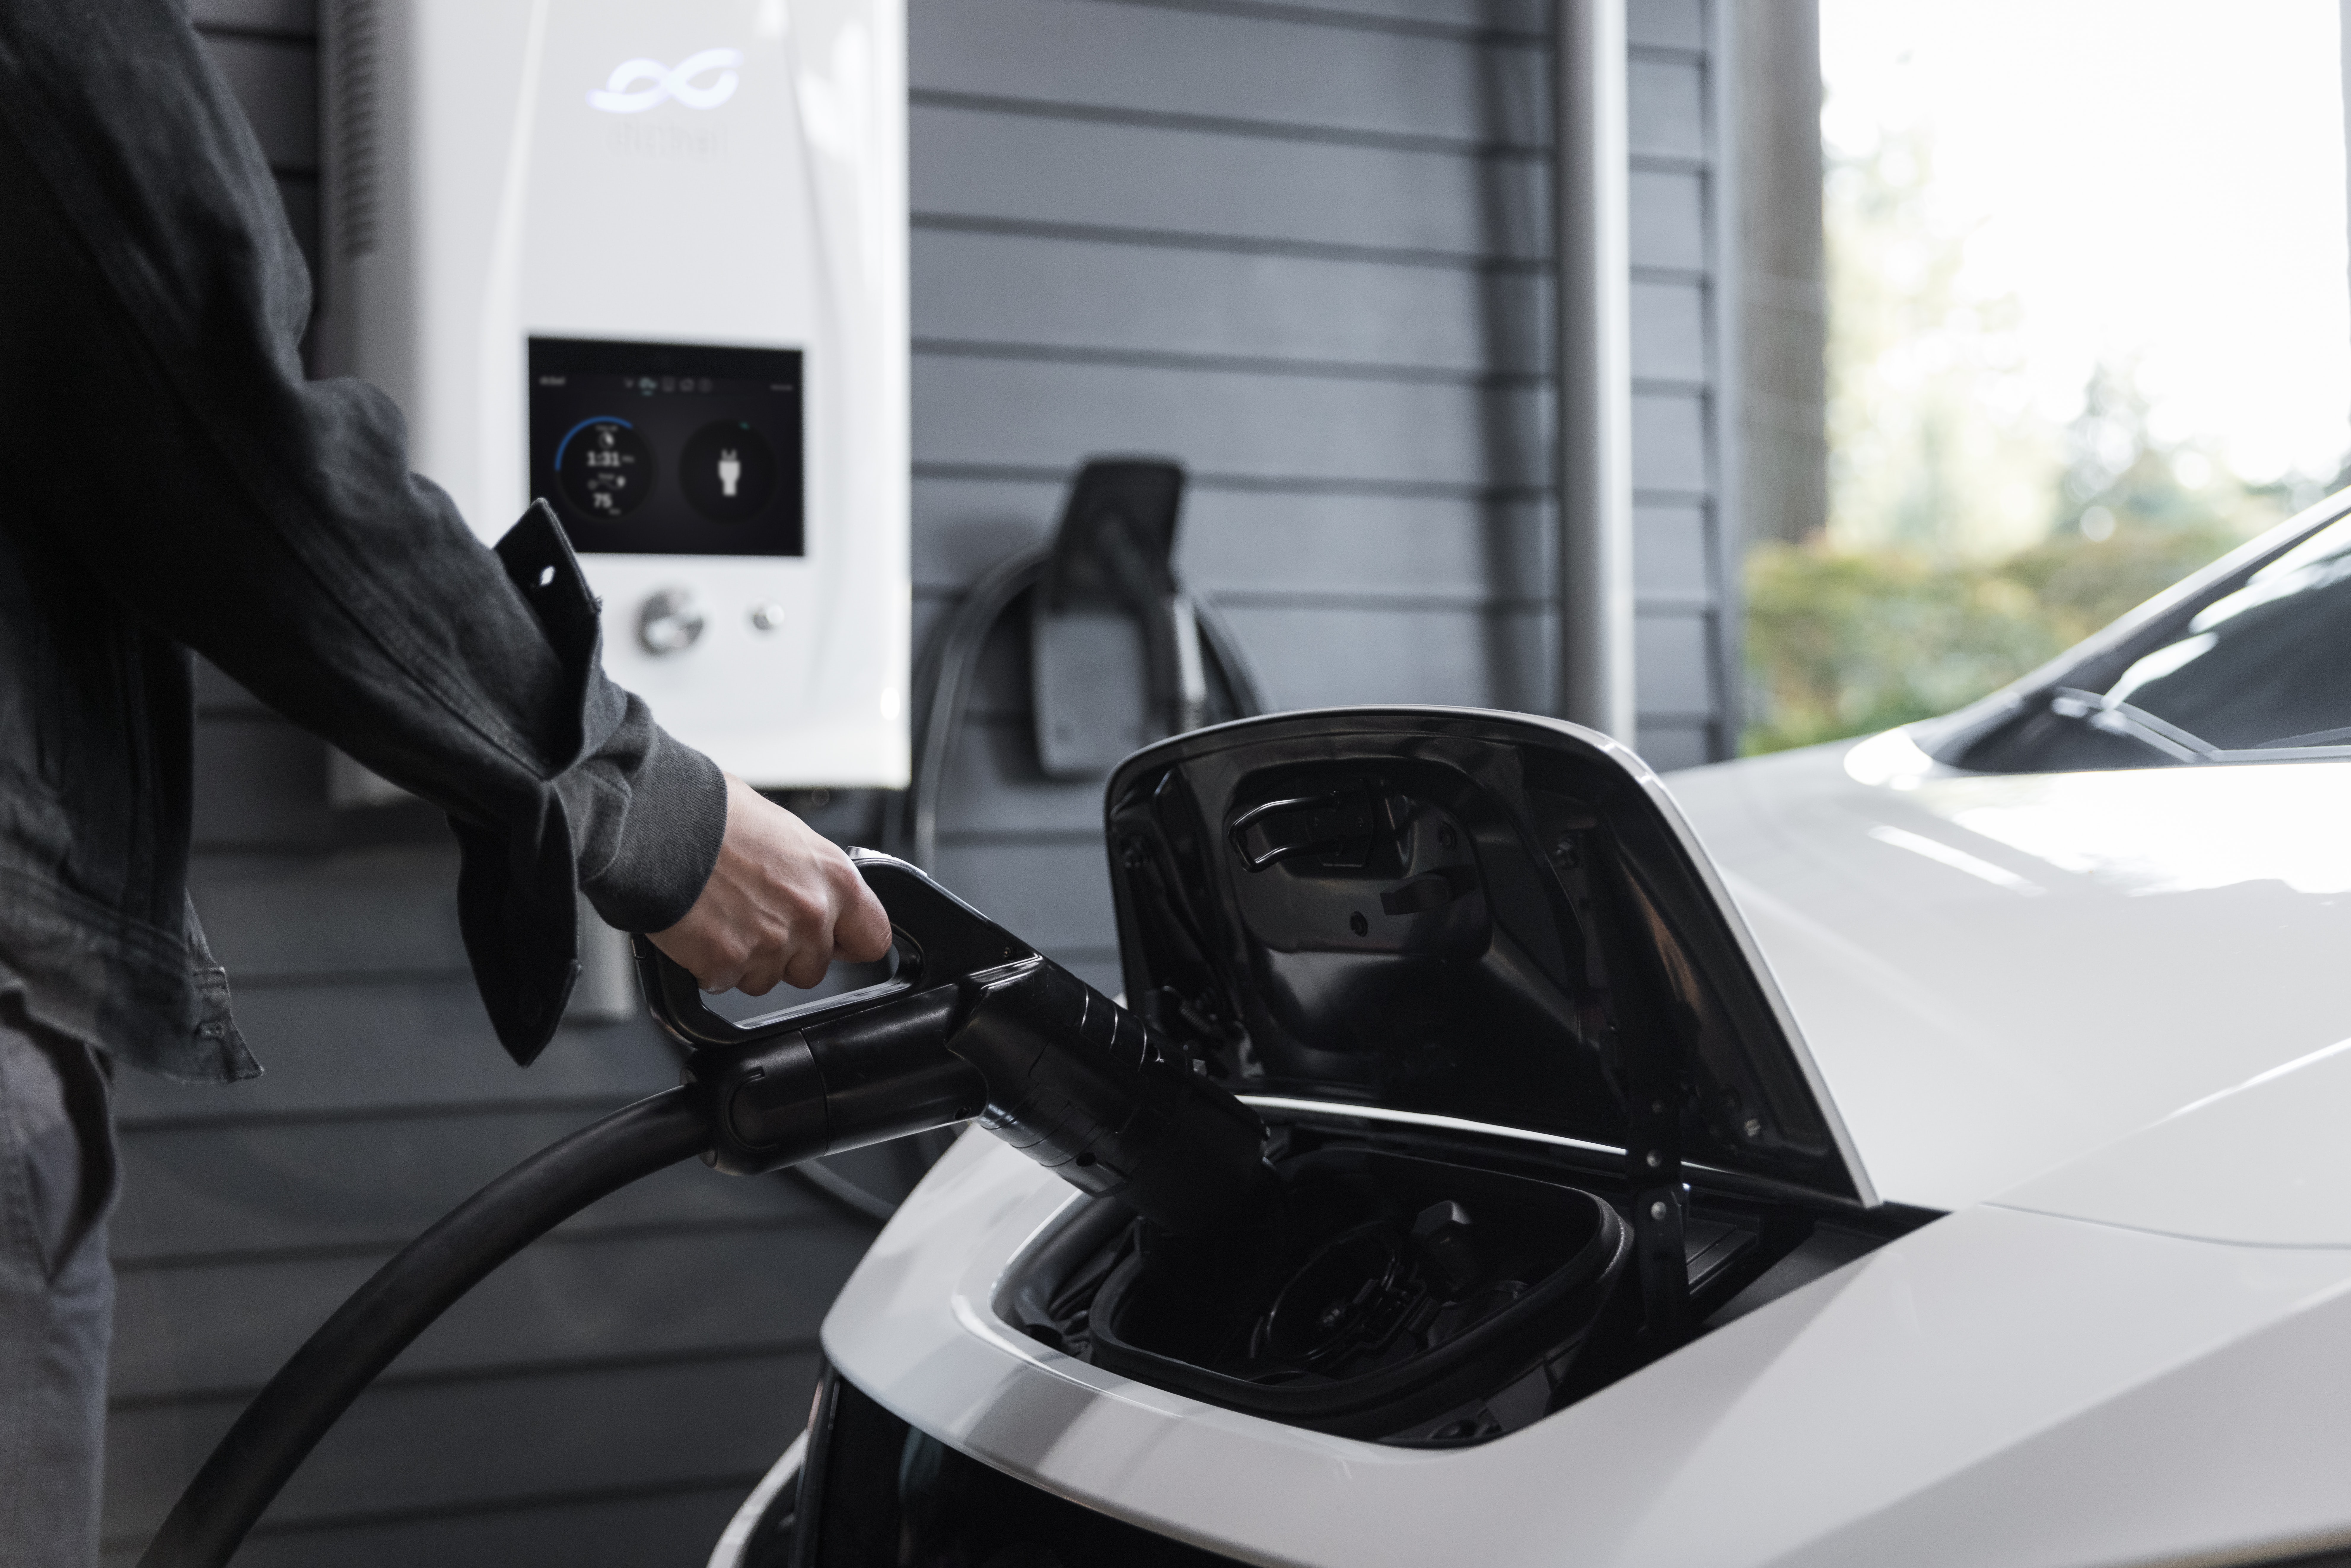 How Infrastructure Legislation Will Change the Future of EV